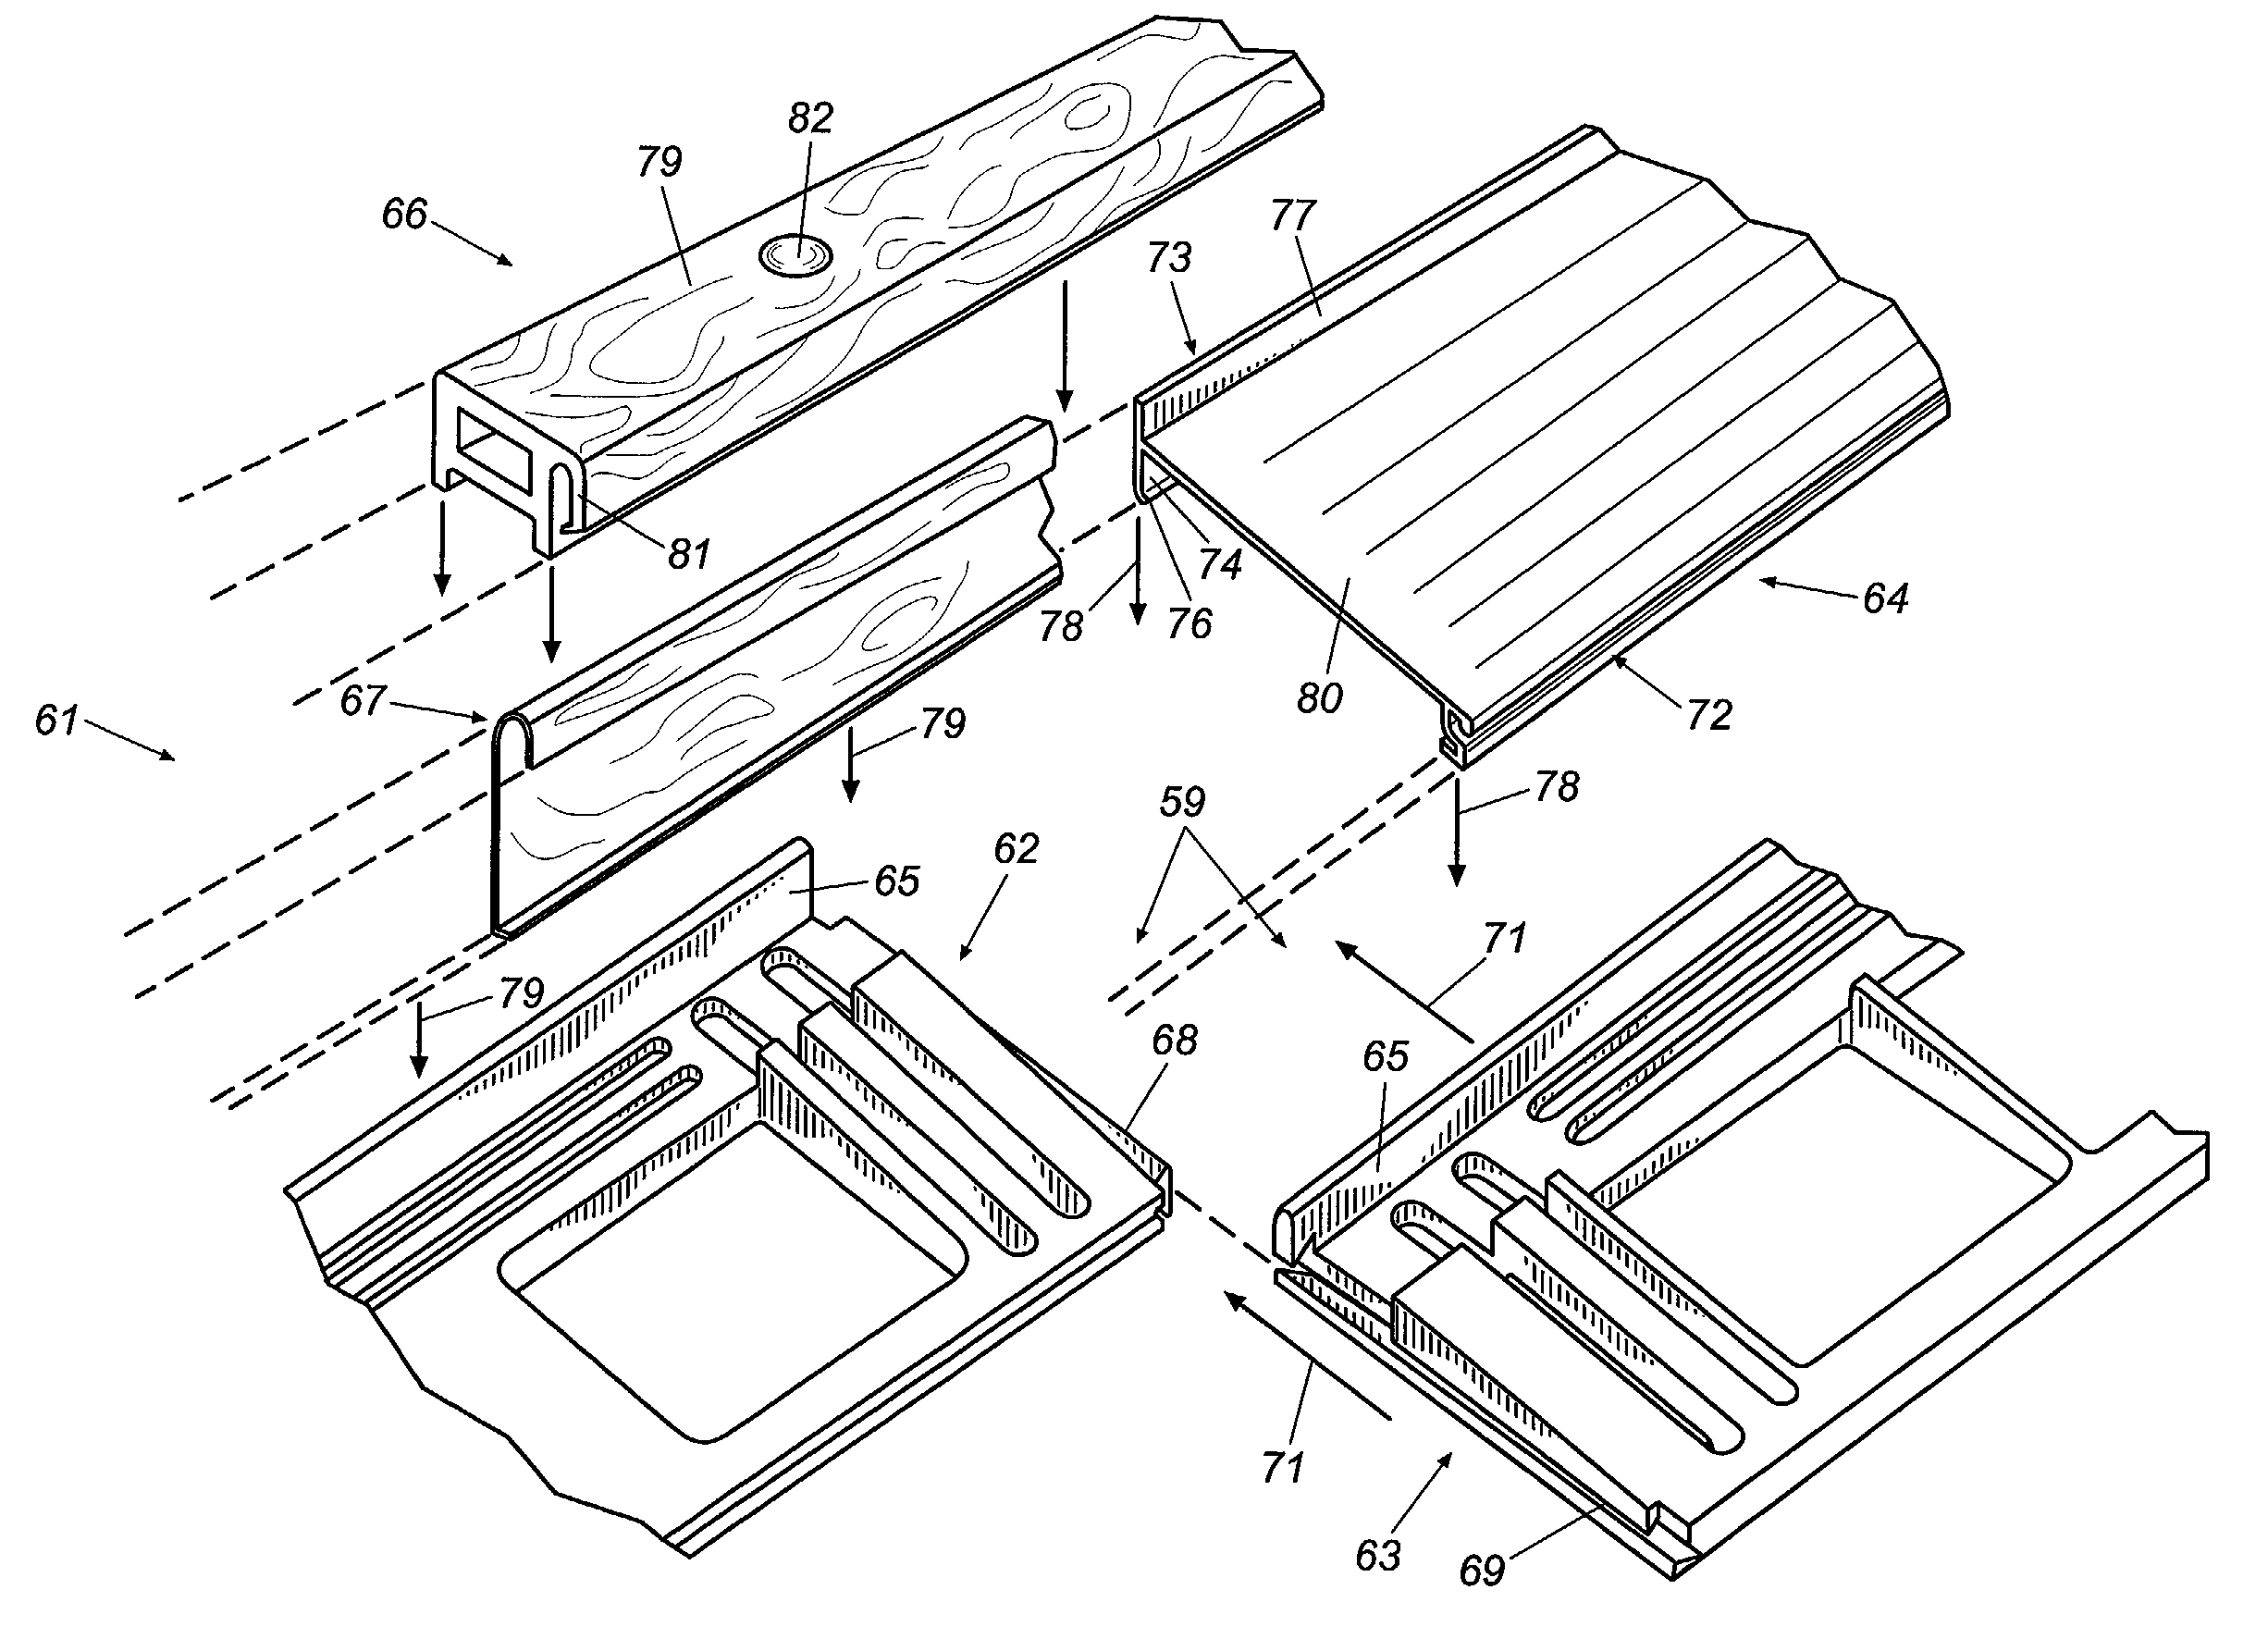 Continuous threshold assembly with modular interlocking substrate sections